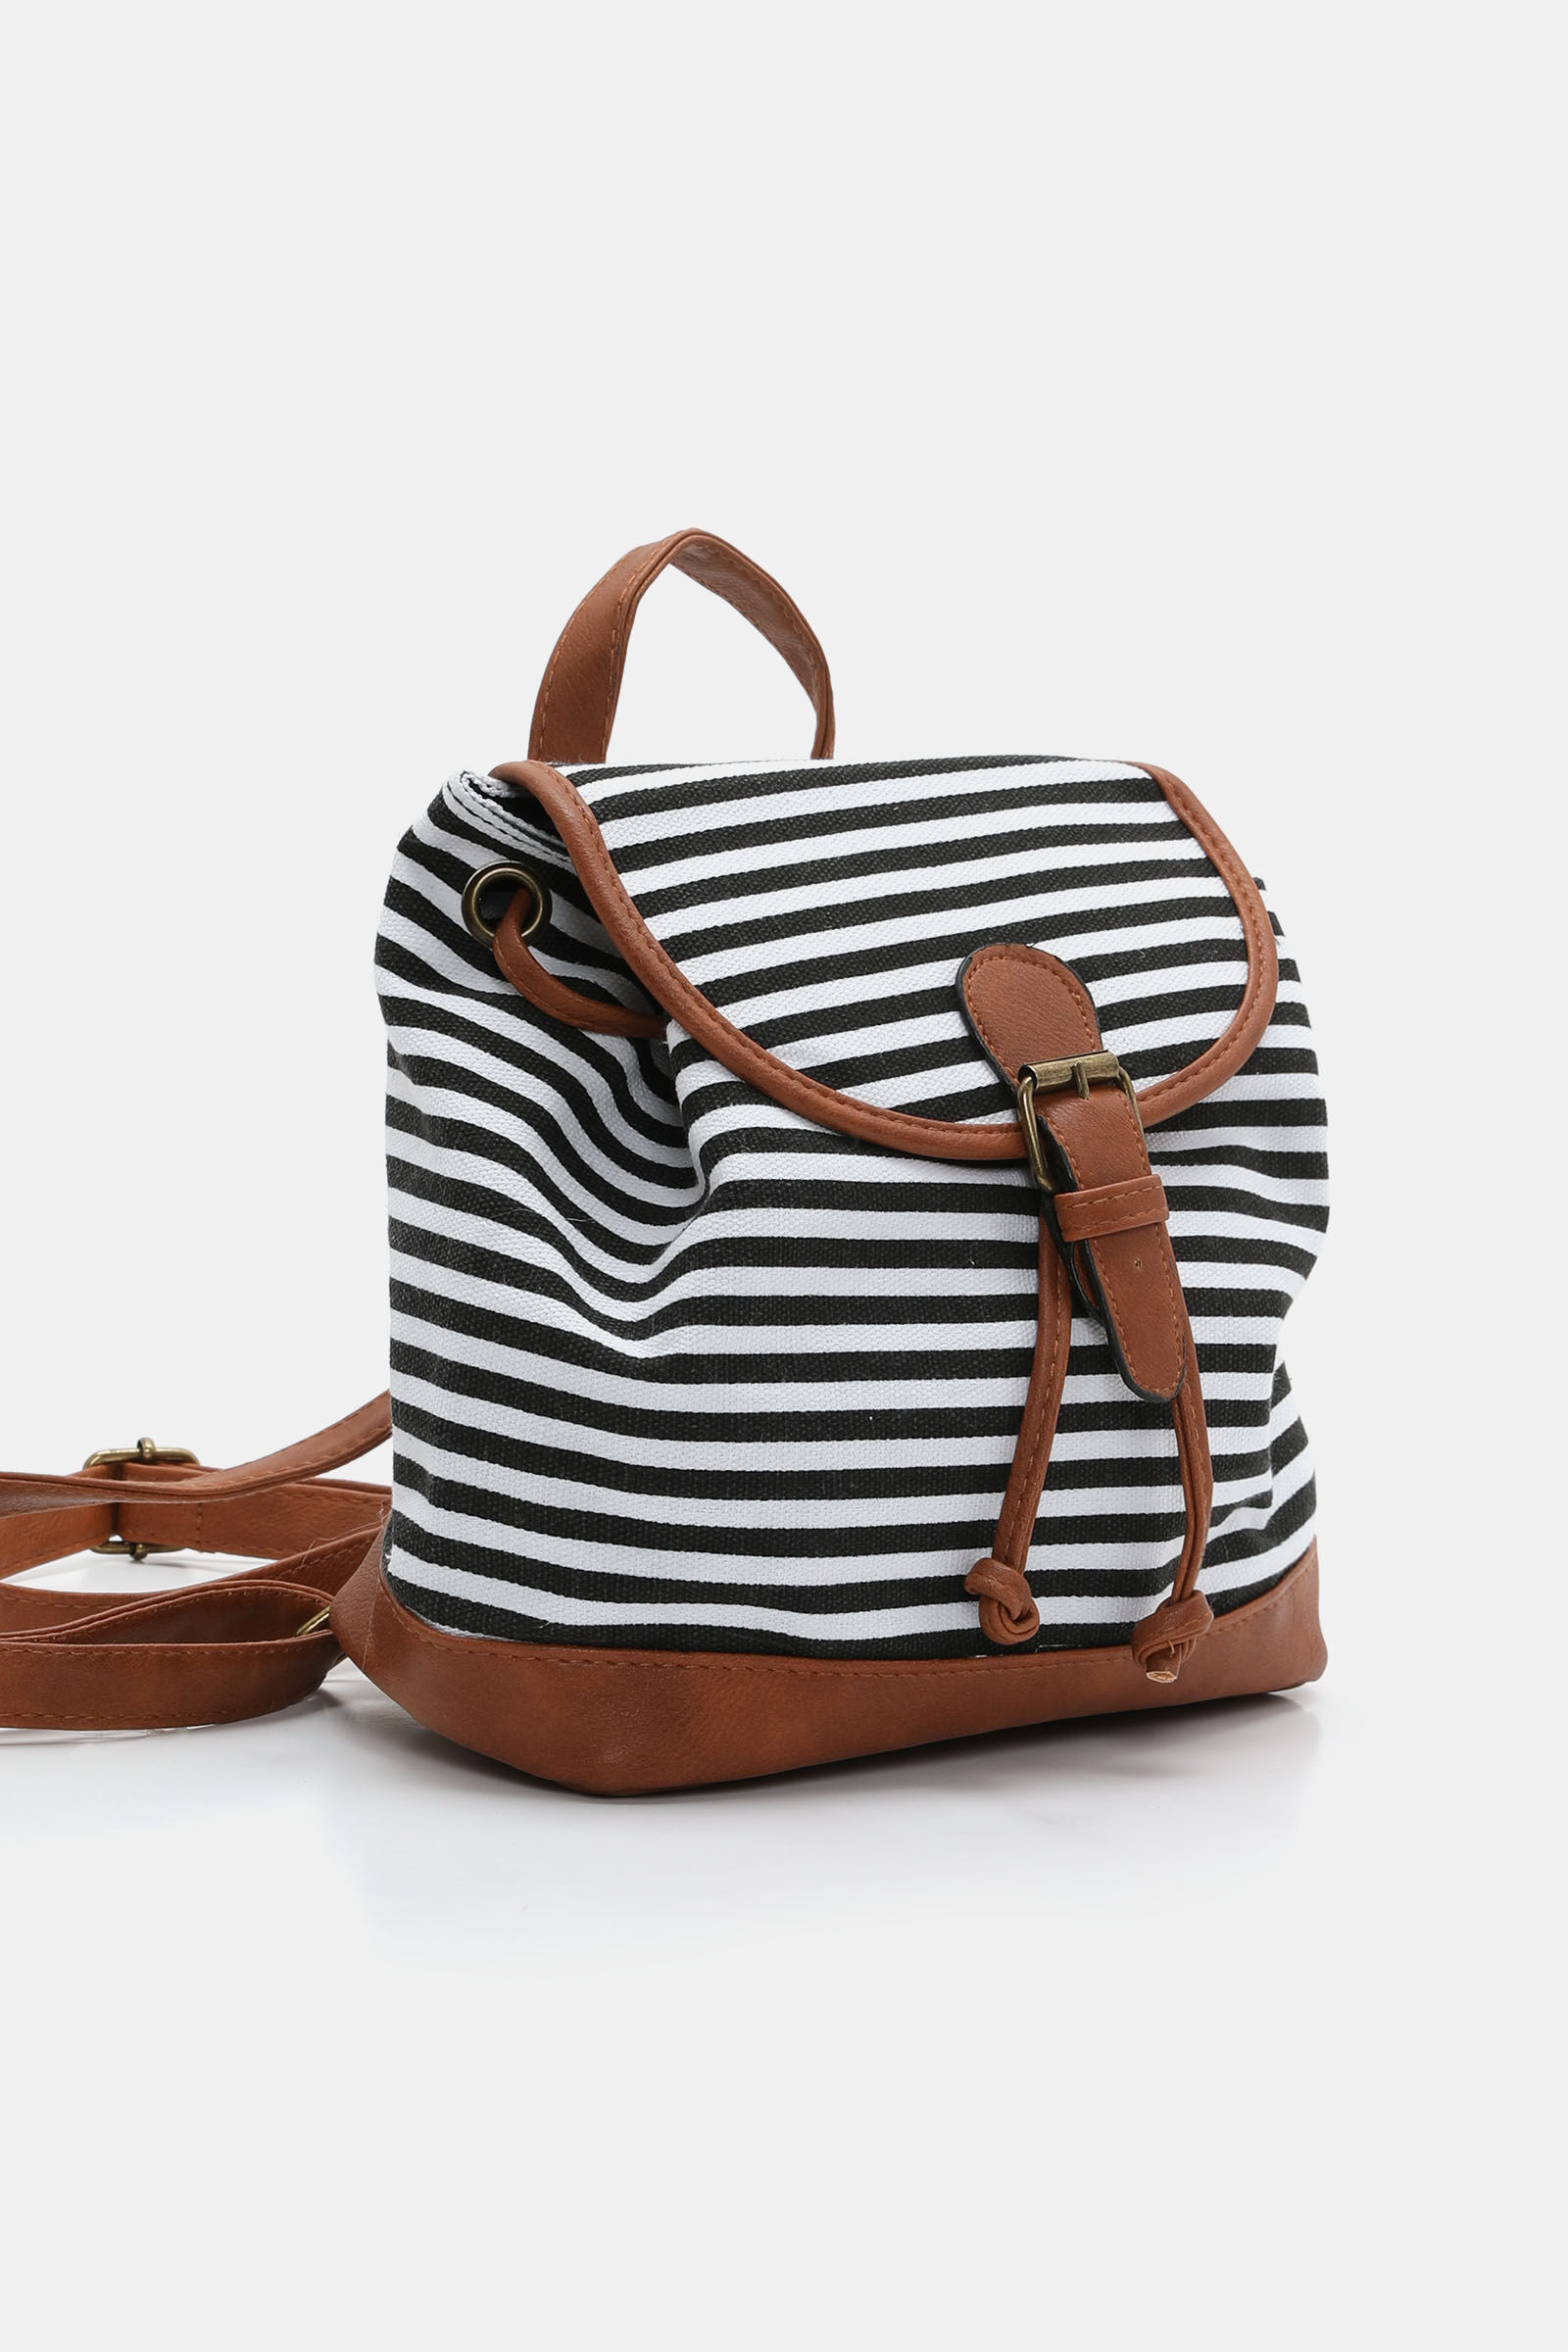 Striped Canvas Backpack Top Sellers, 50% OFF | www.ingeniovirtual.com